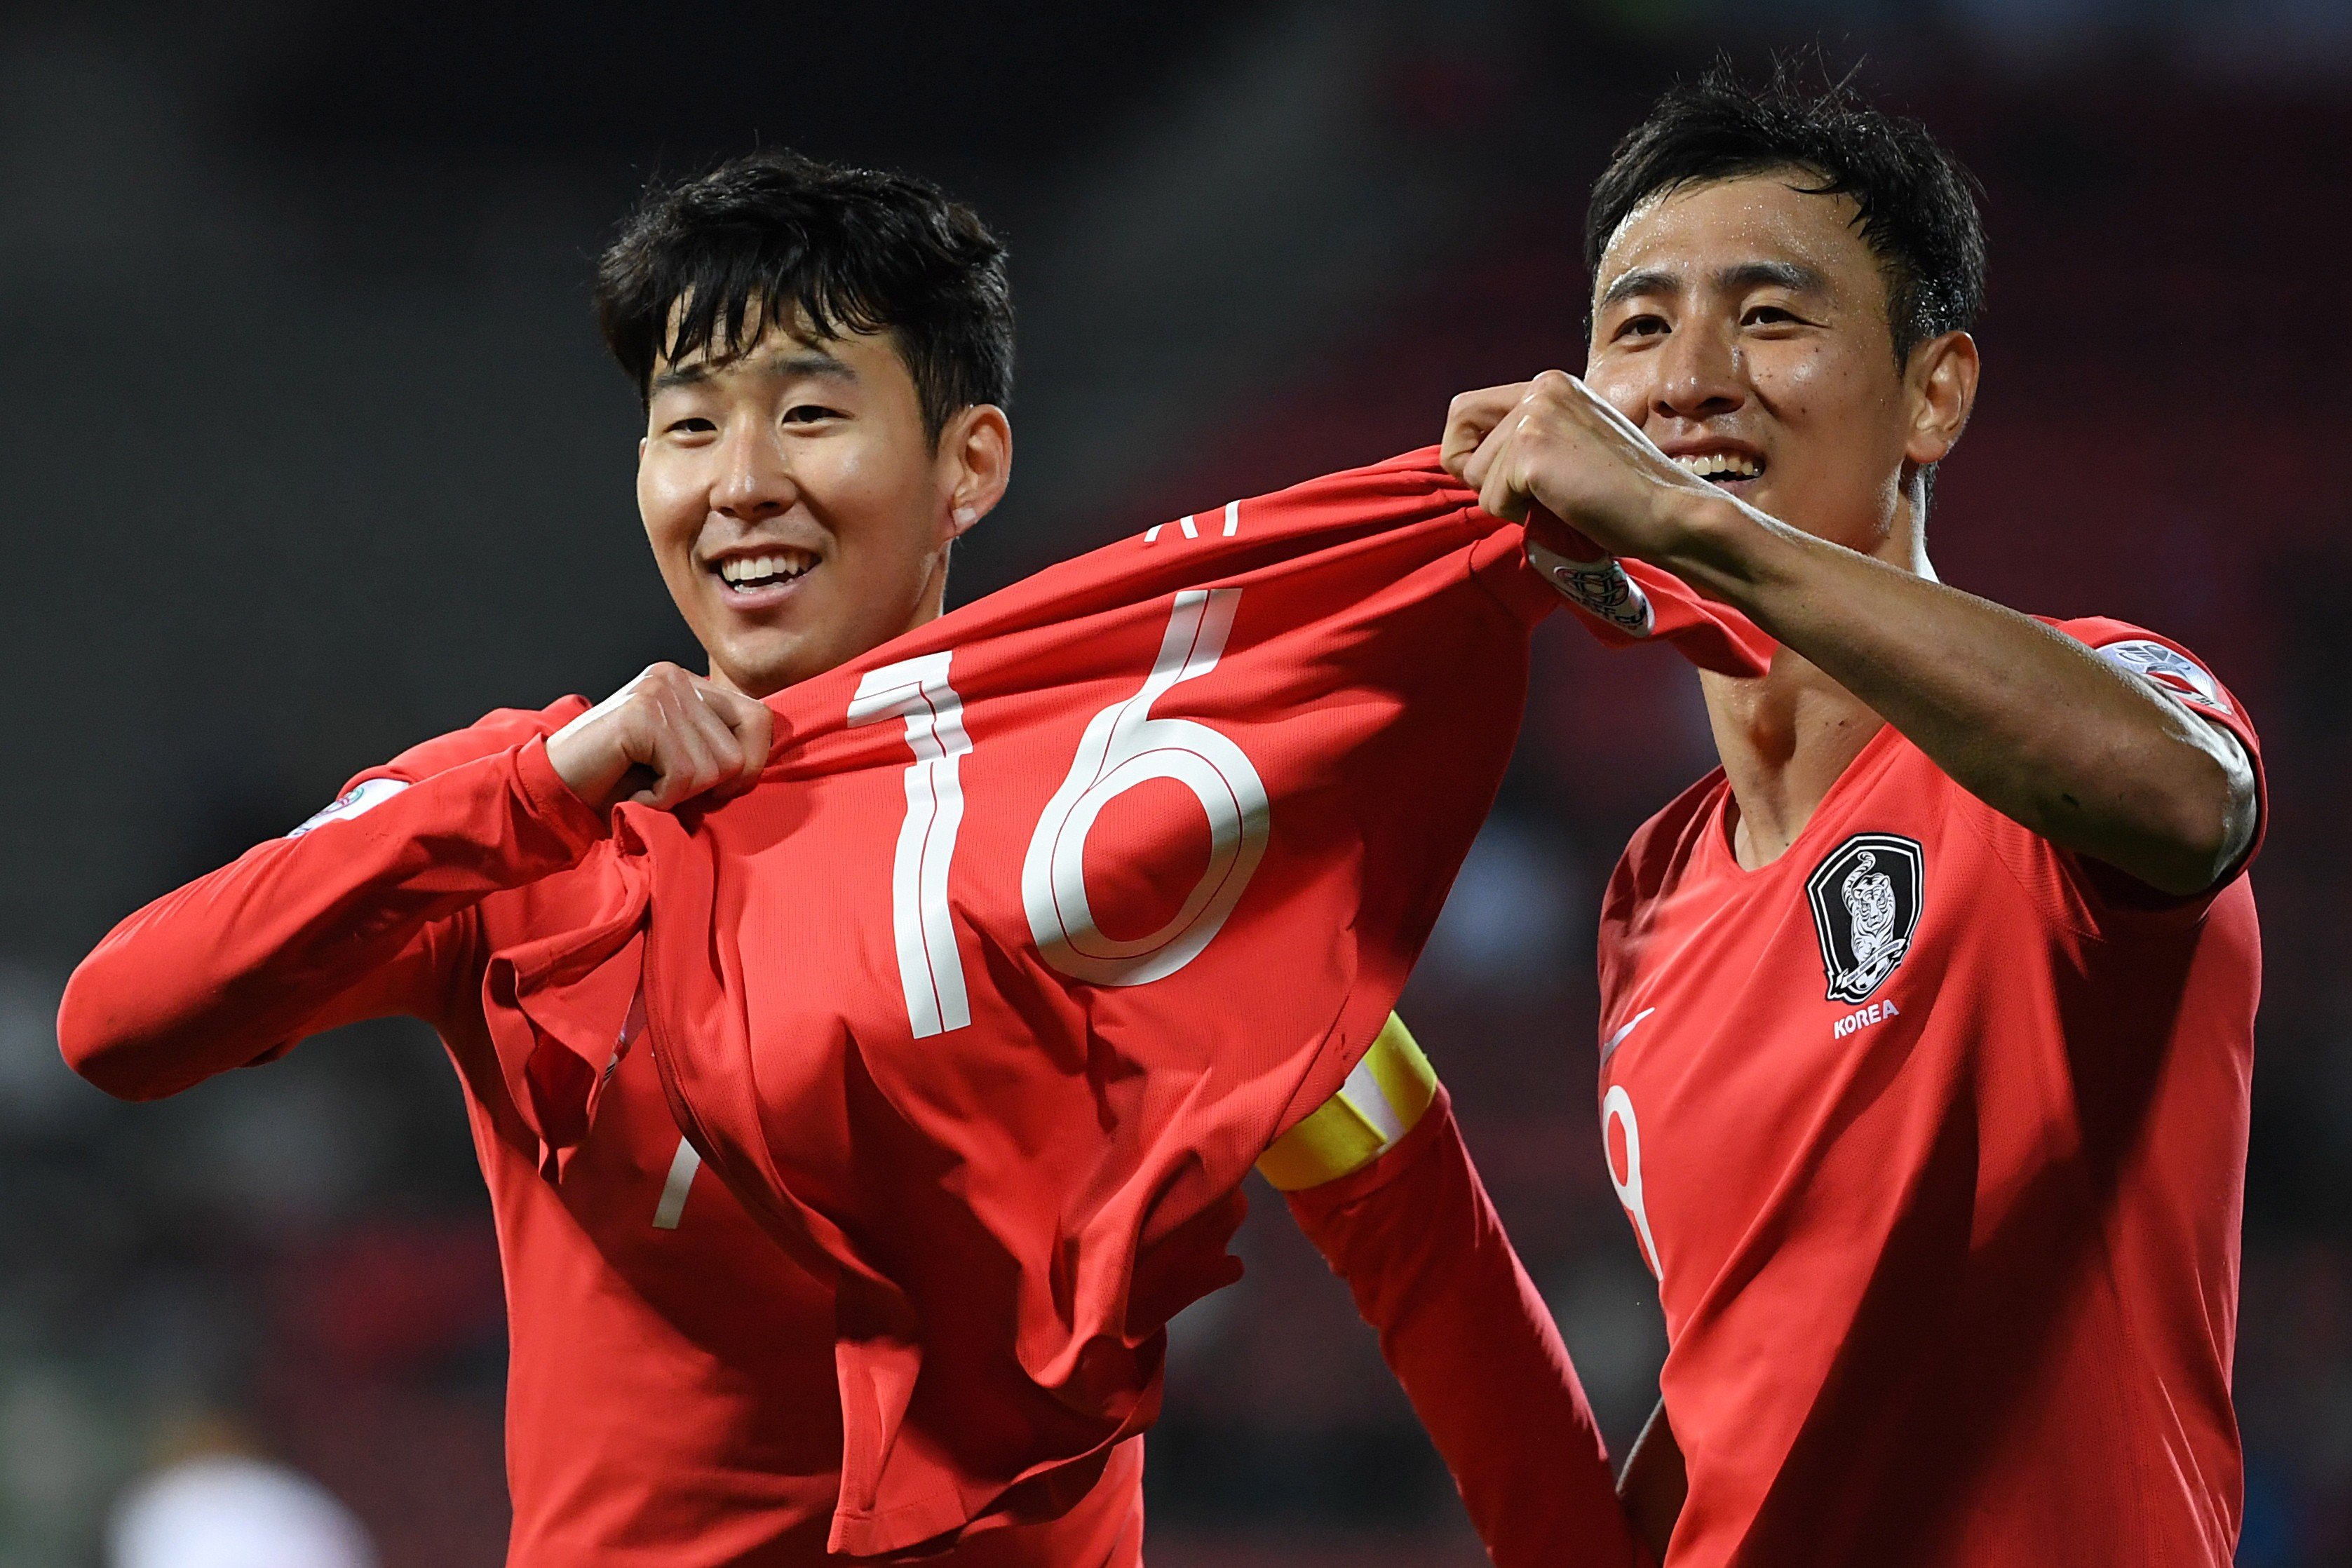 Son Heung-min (left) and Ji Dong-won celebrate a 2-1 victory over Bahrain in the round of 16 at the AFC Asian Cup in Dubai. Photo: EPA